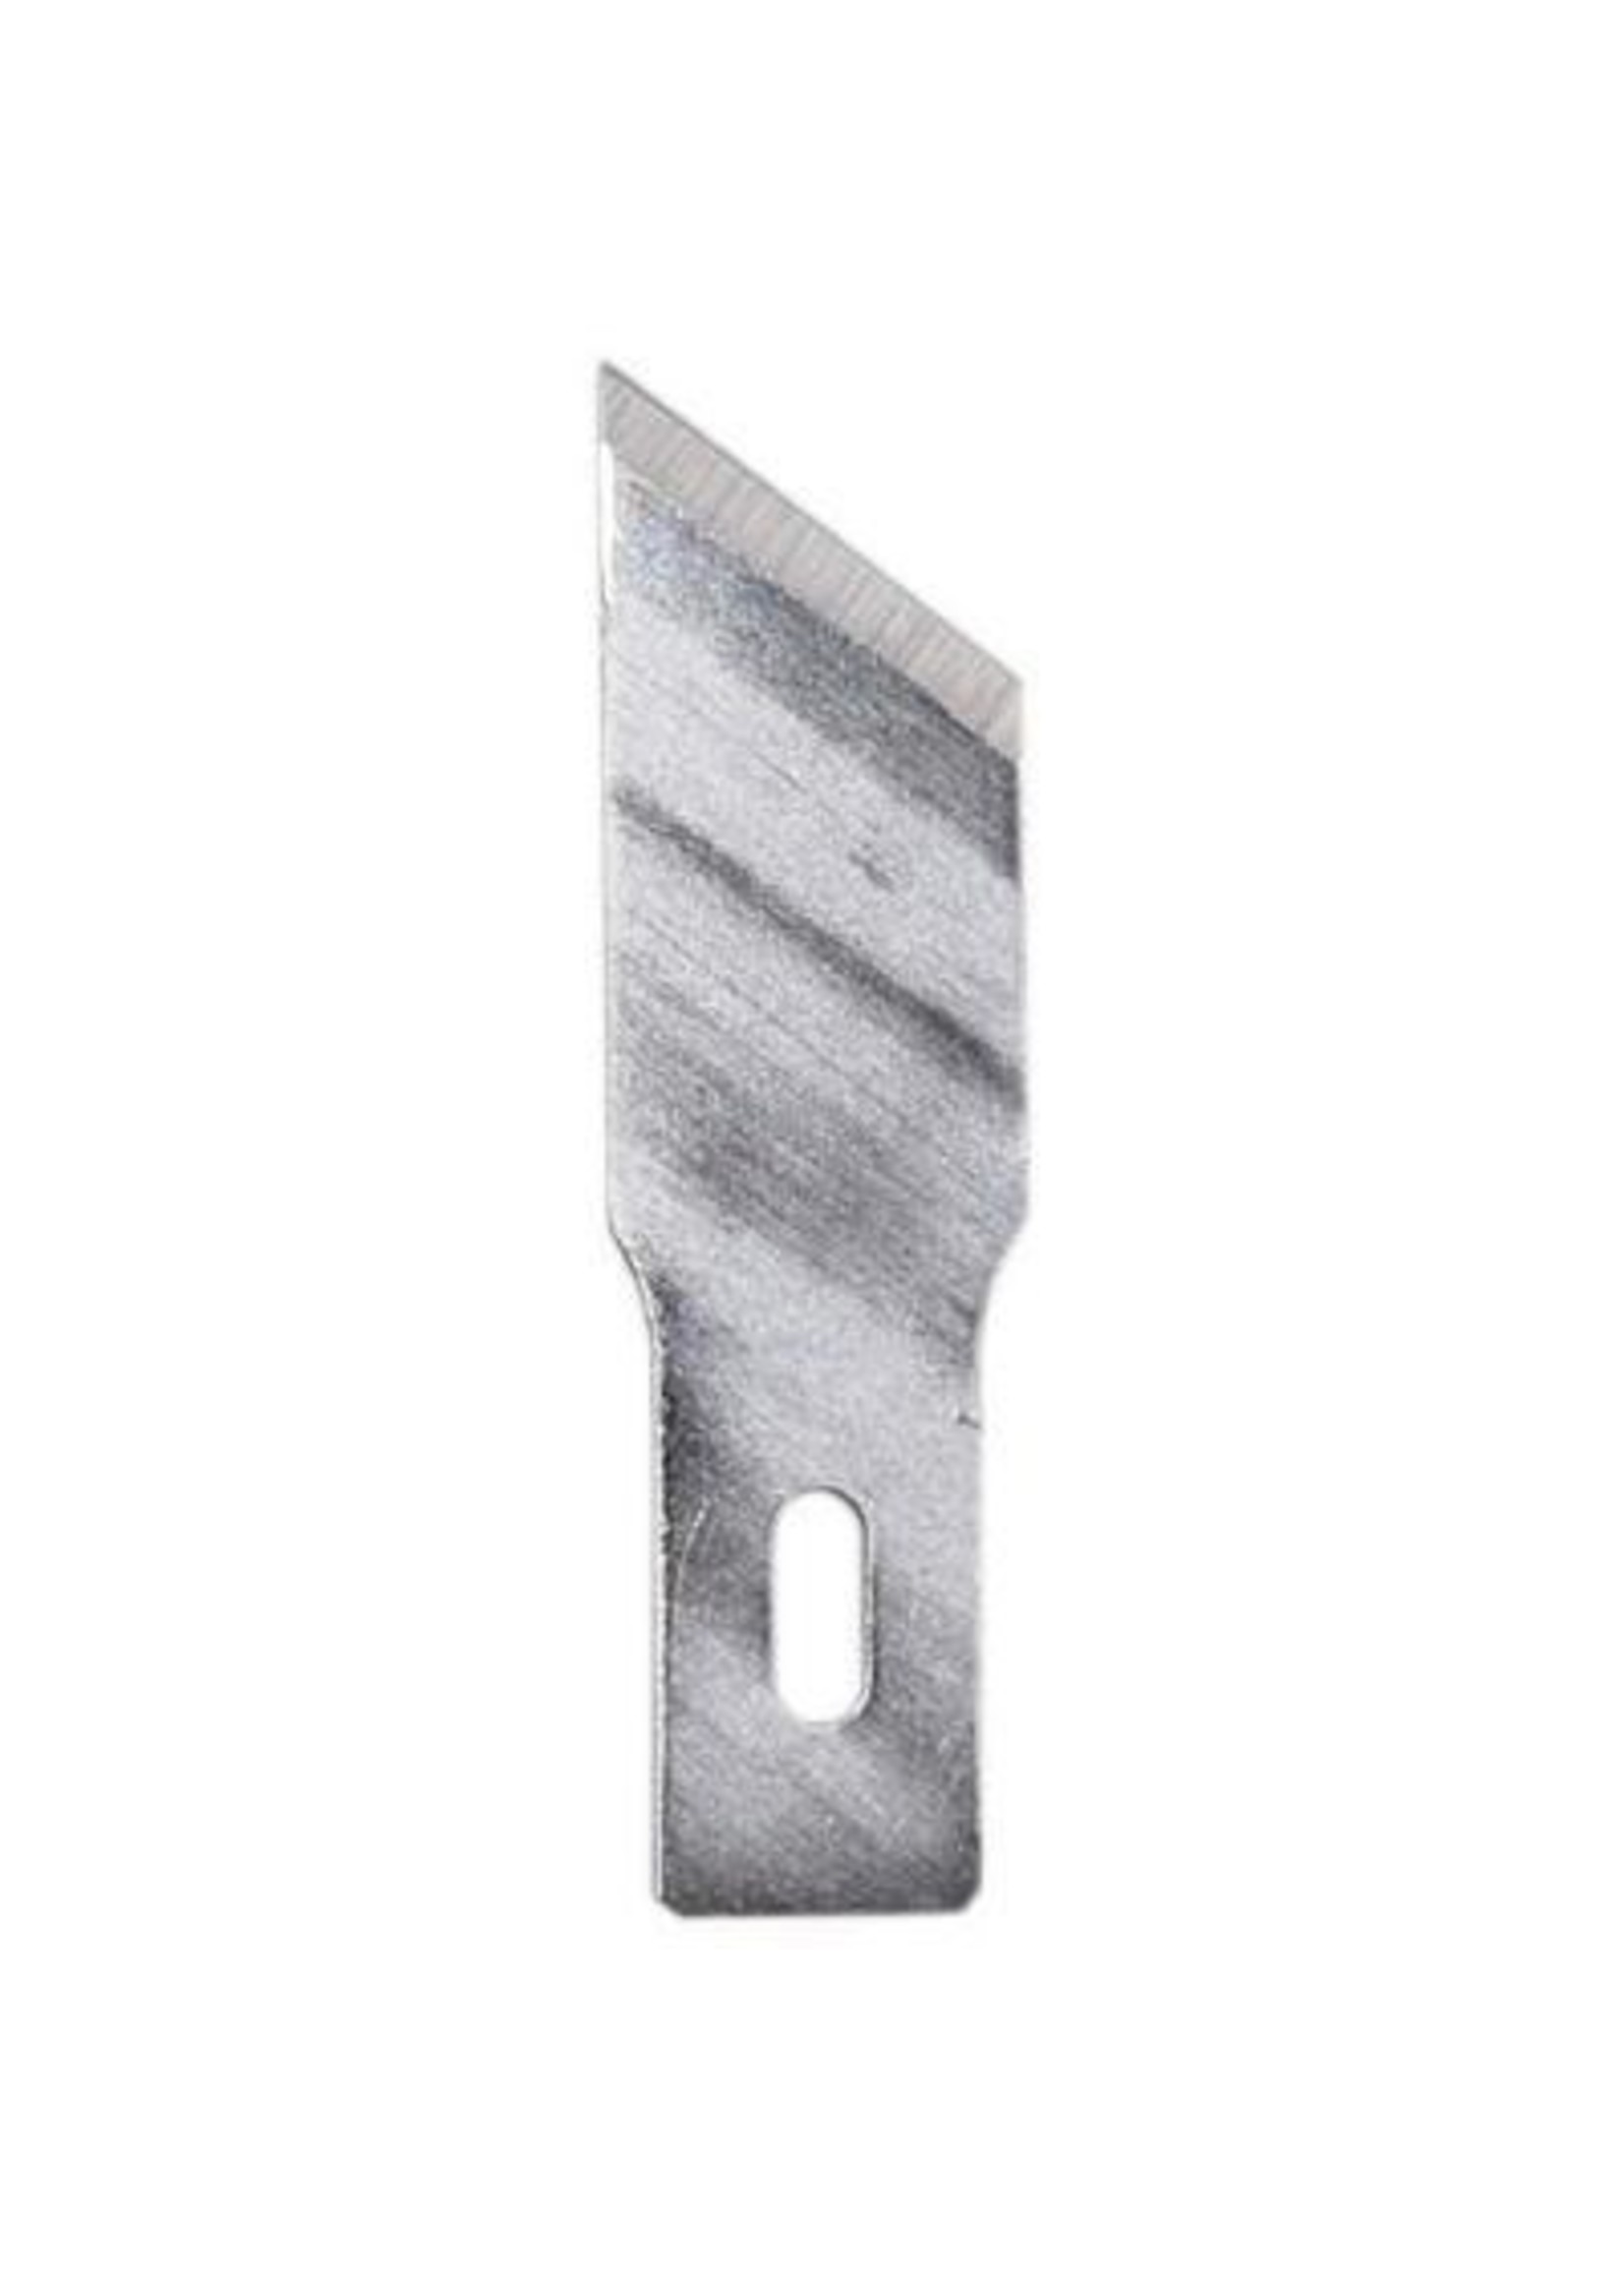 Excel 20019 - #19 Replacement Sharp Edge Blades (5)